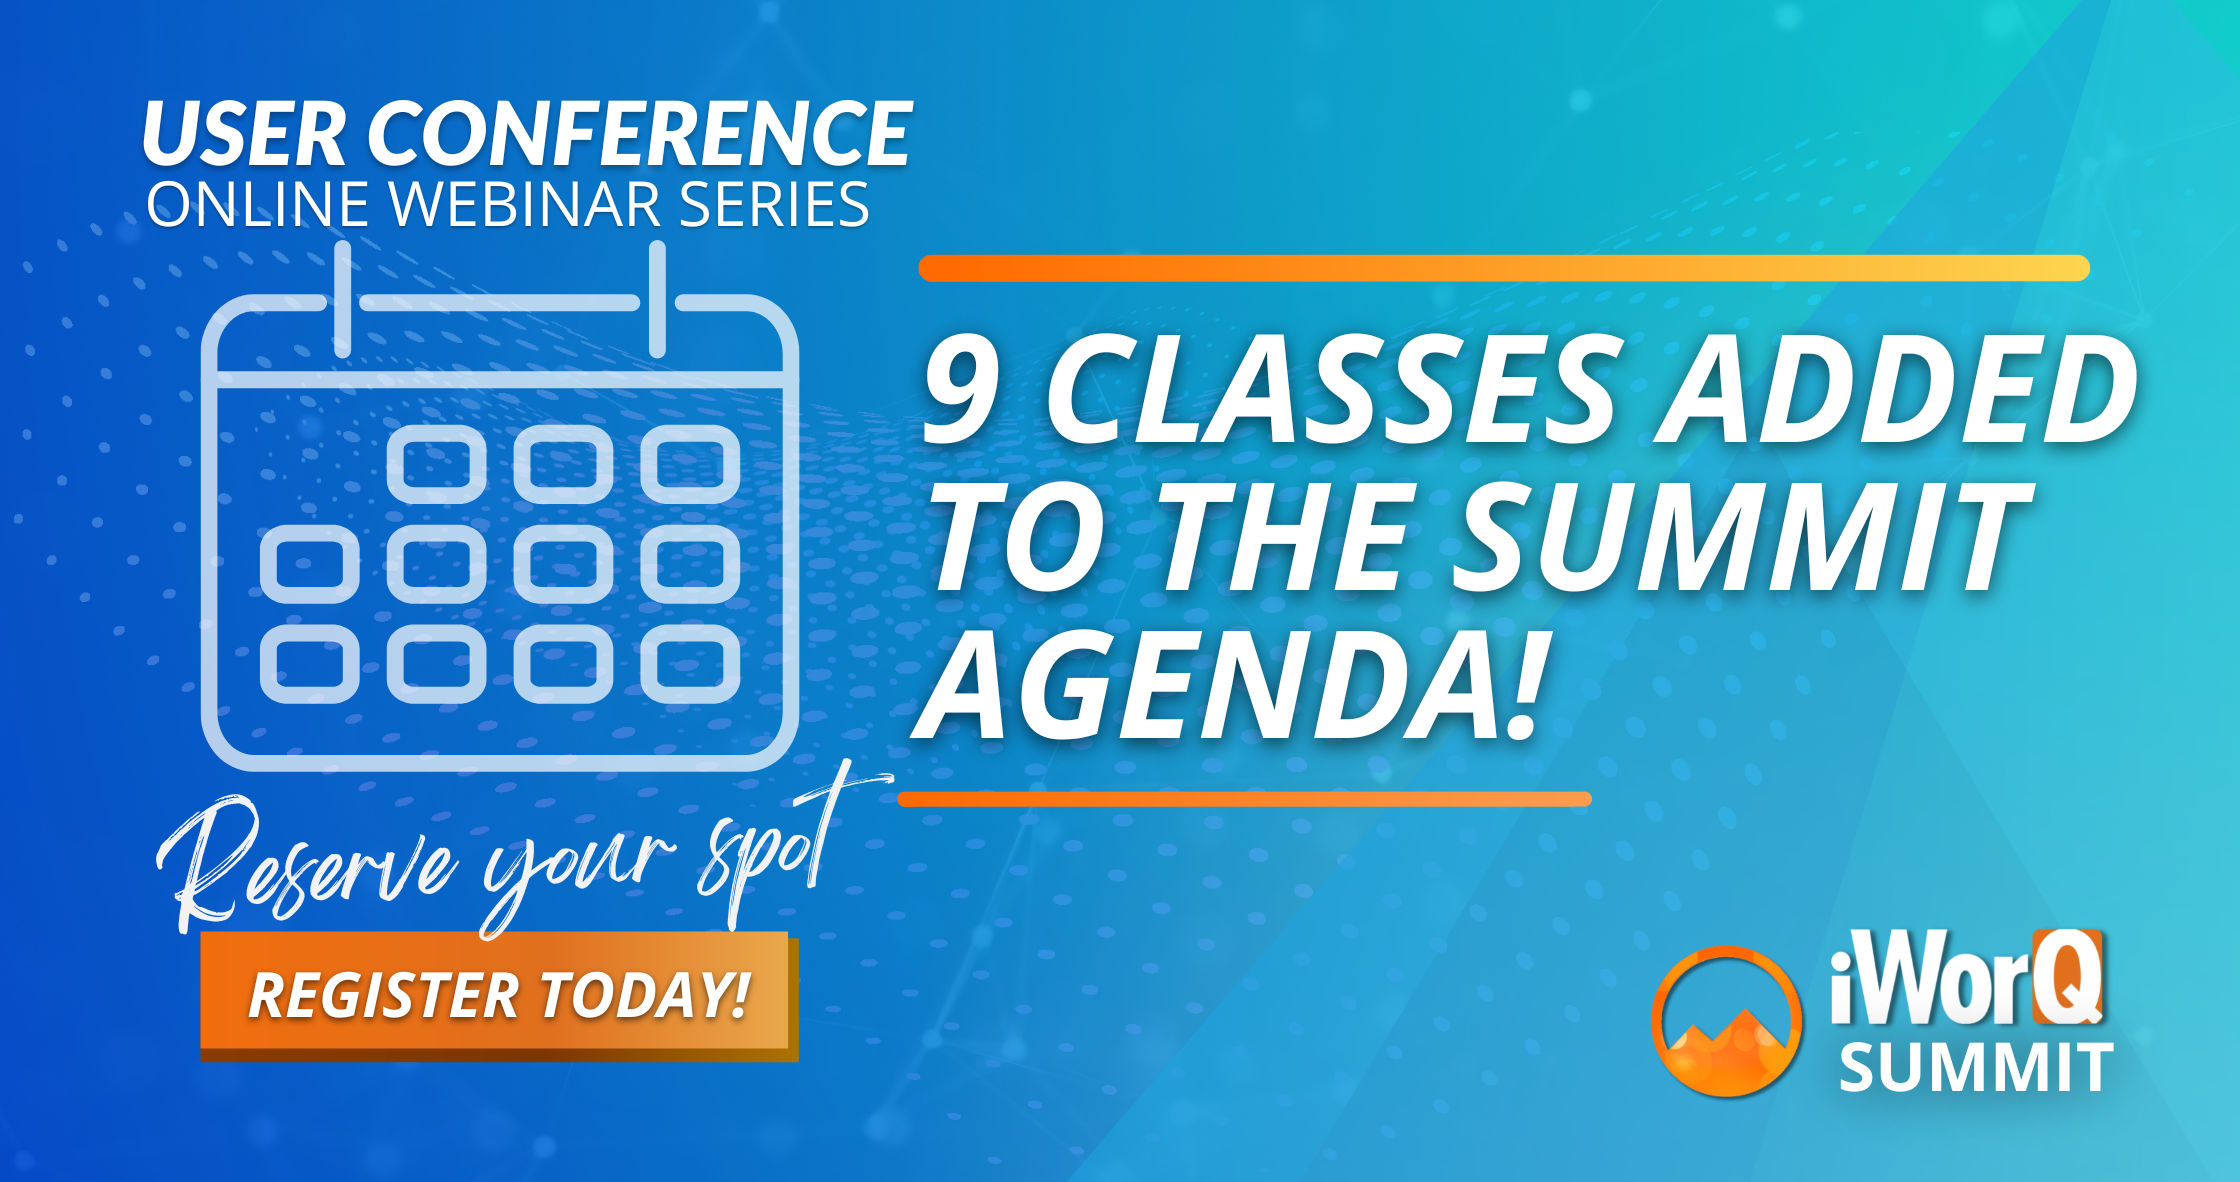 Featured image for “9 New Classes Added to Summit Agenda!”